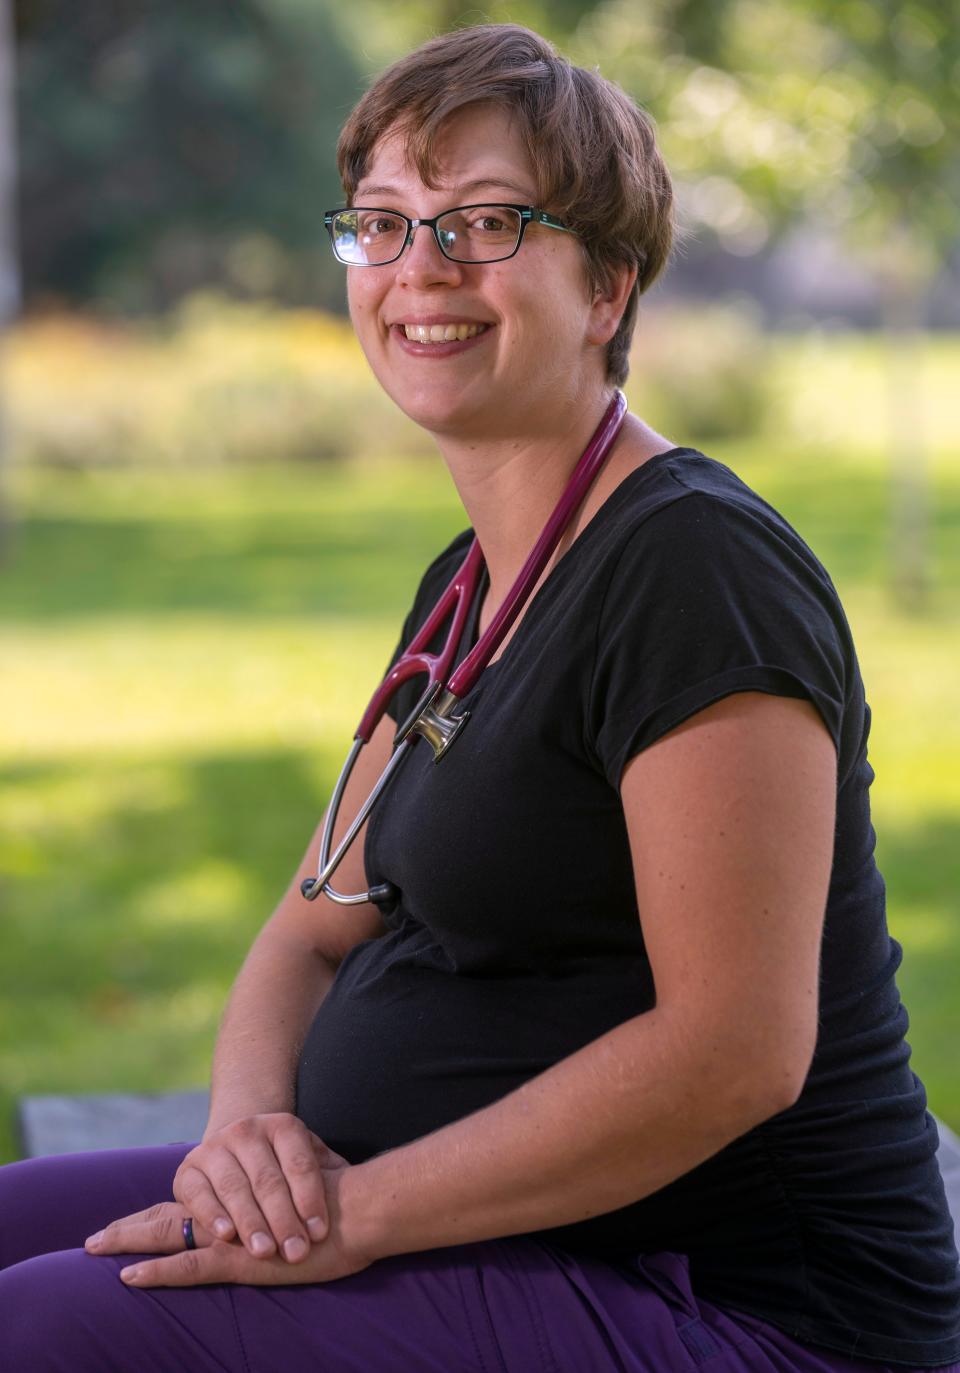 UW Health nurse Amelia Zepnick is shown Sept. 8 in Madison. Zepnick said the safety of patients and nurses is being potentially compromised because of the staffing shortages.